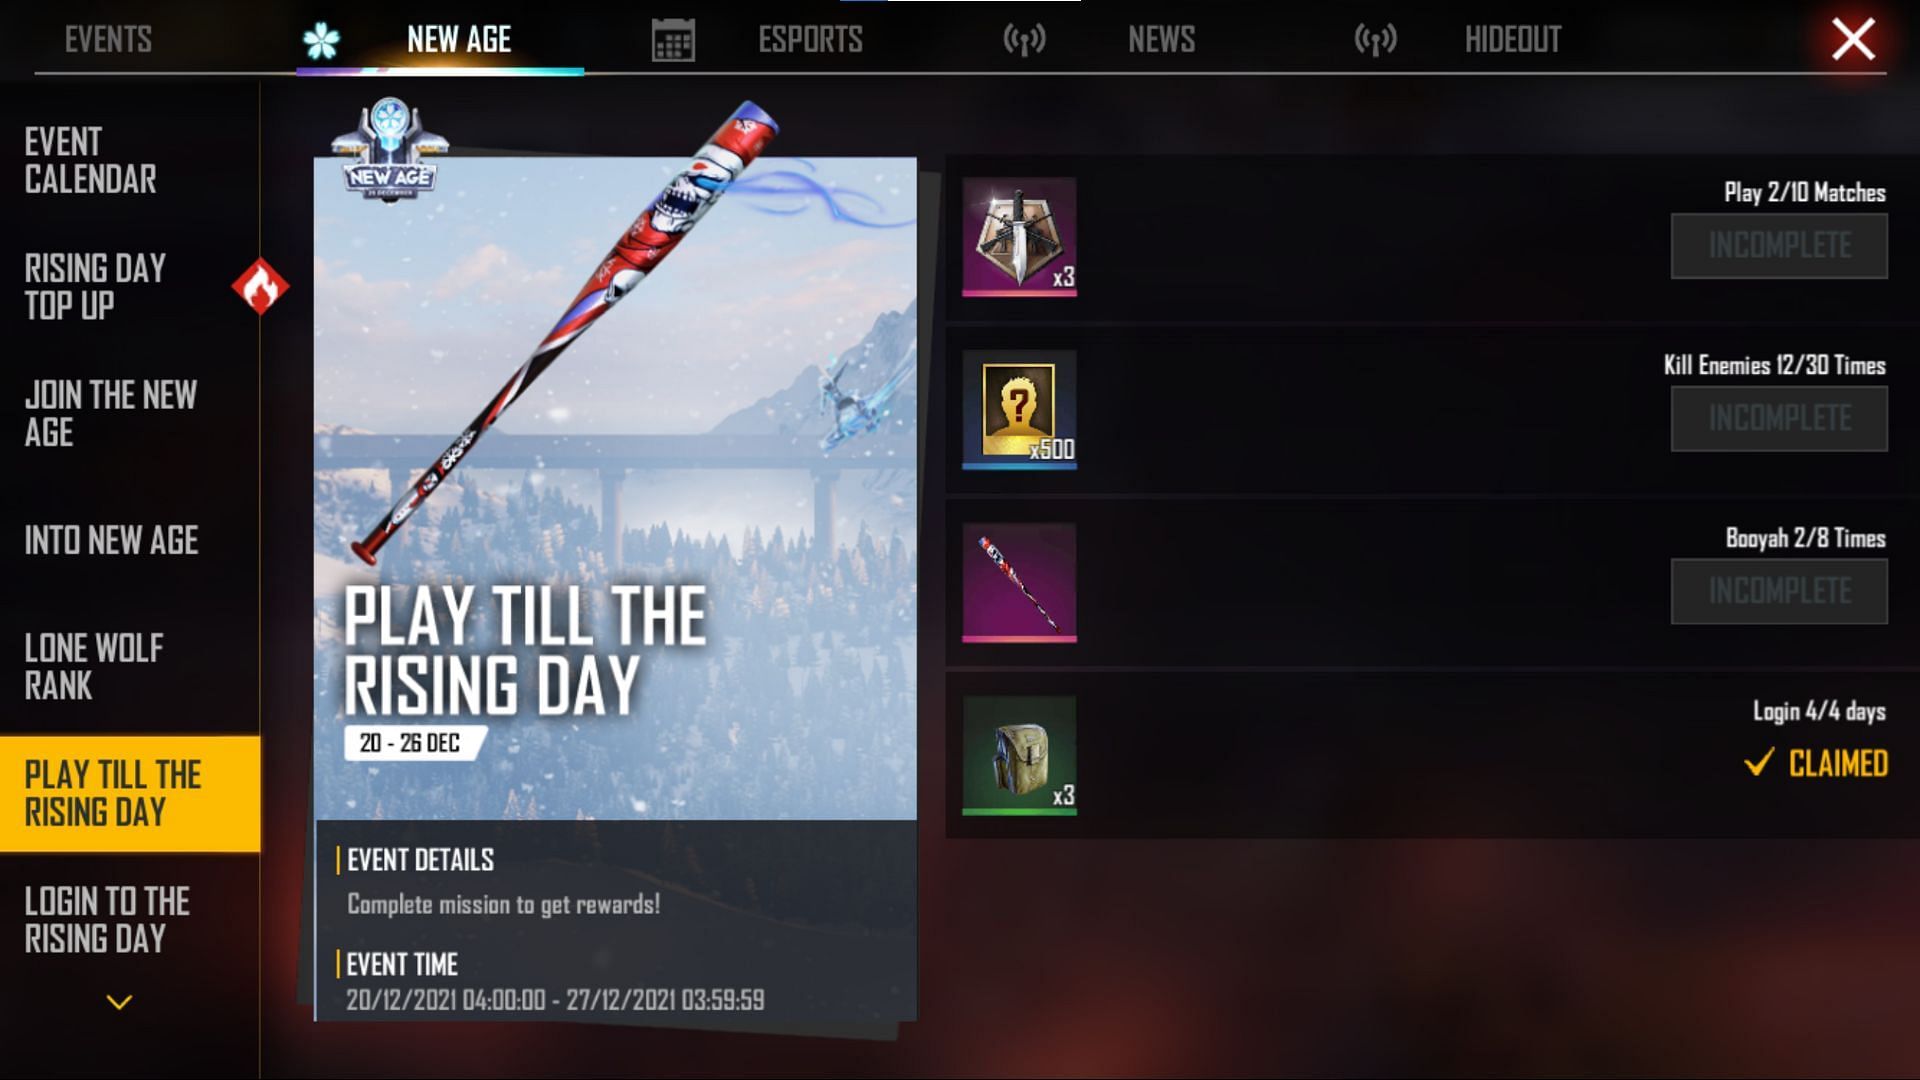 Play Till the Rising Day event (Image via Free Fire)